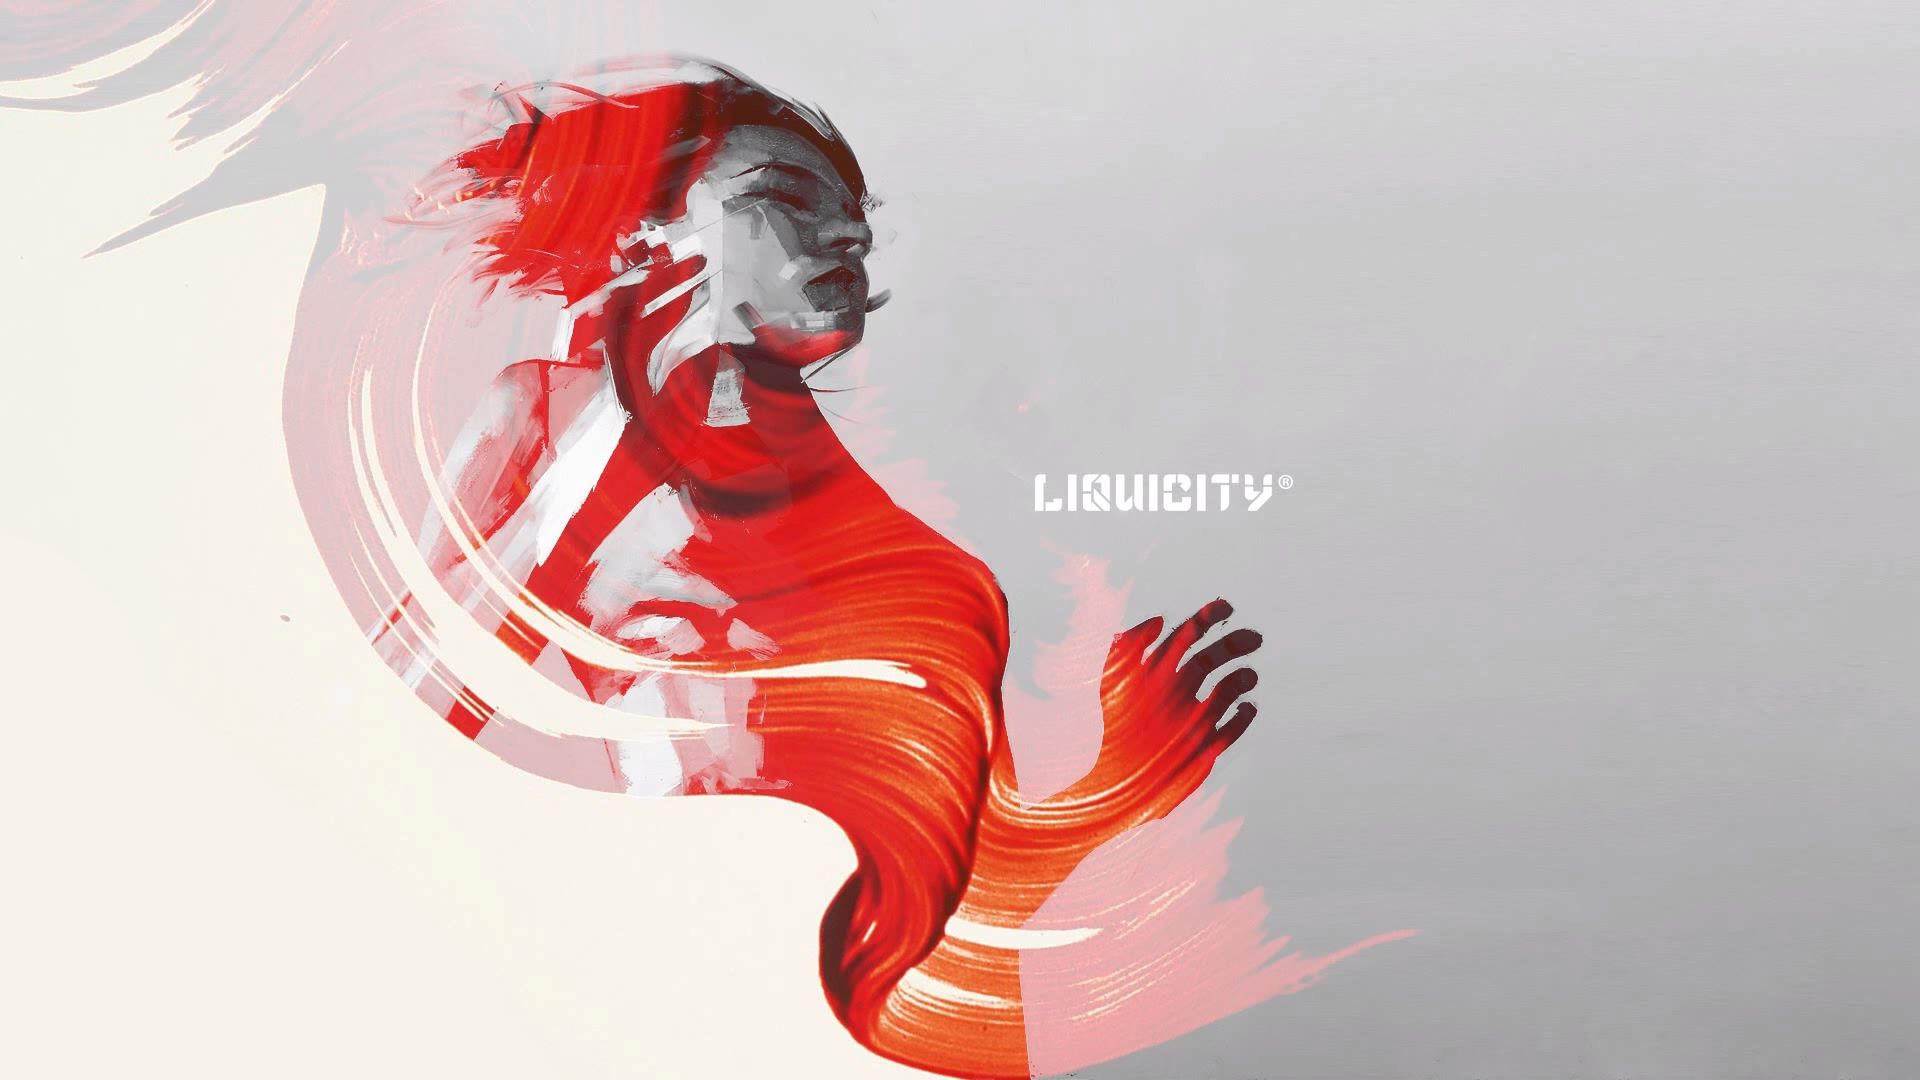 Download mobile wallpaper Music, Liquicity for free.